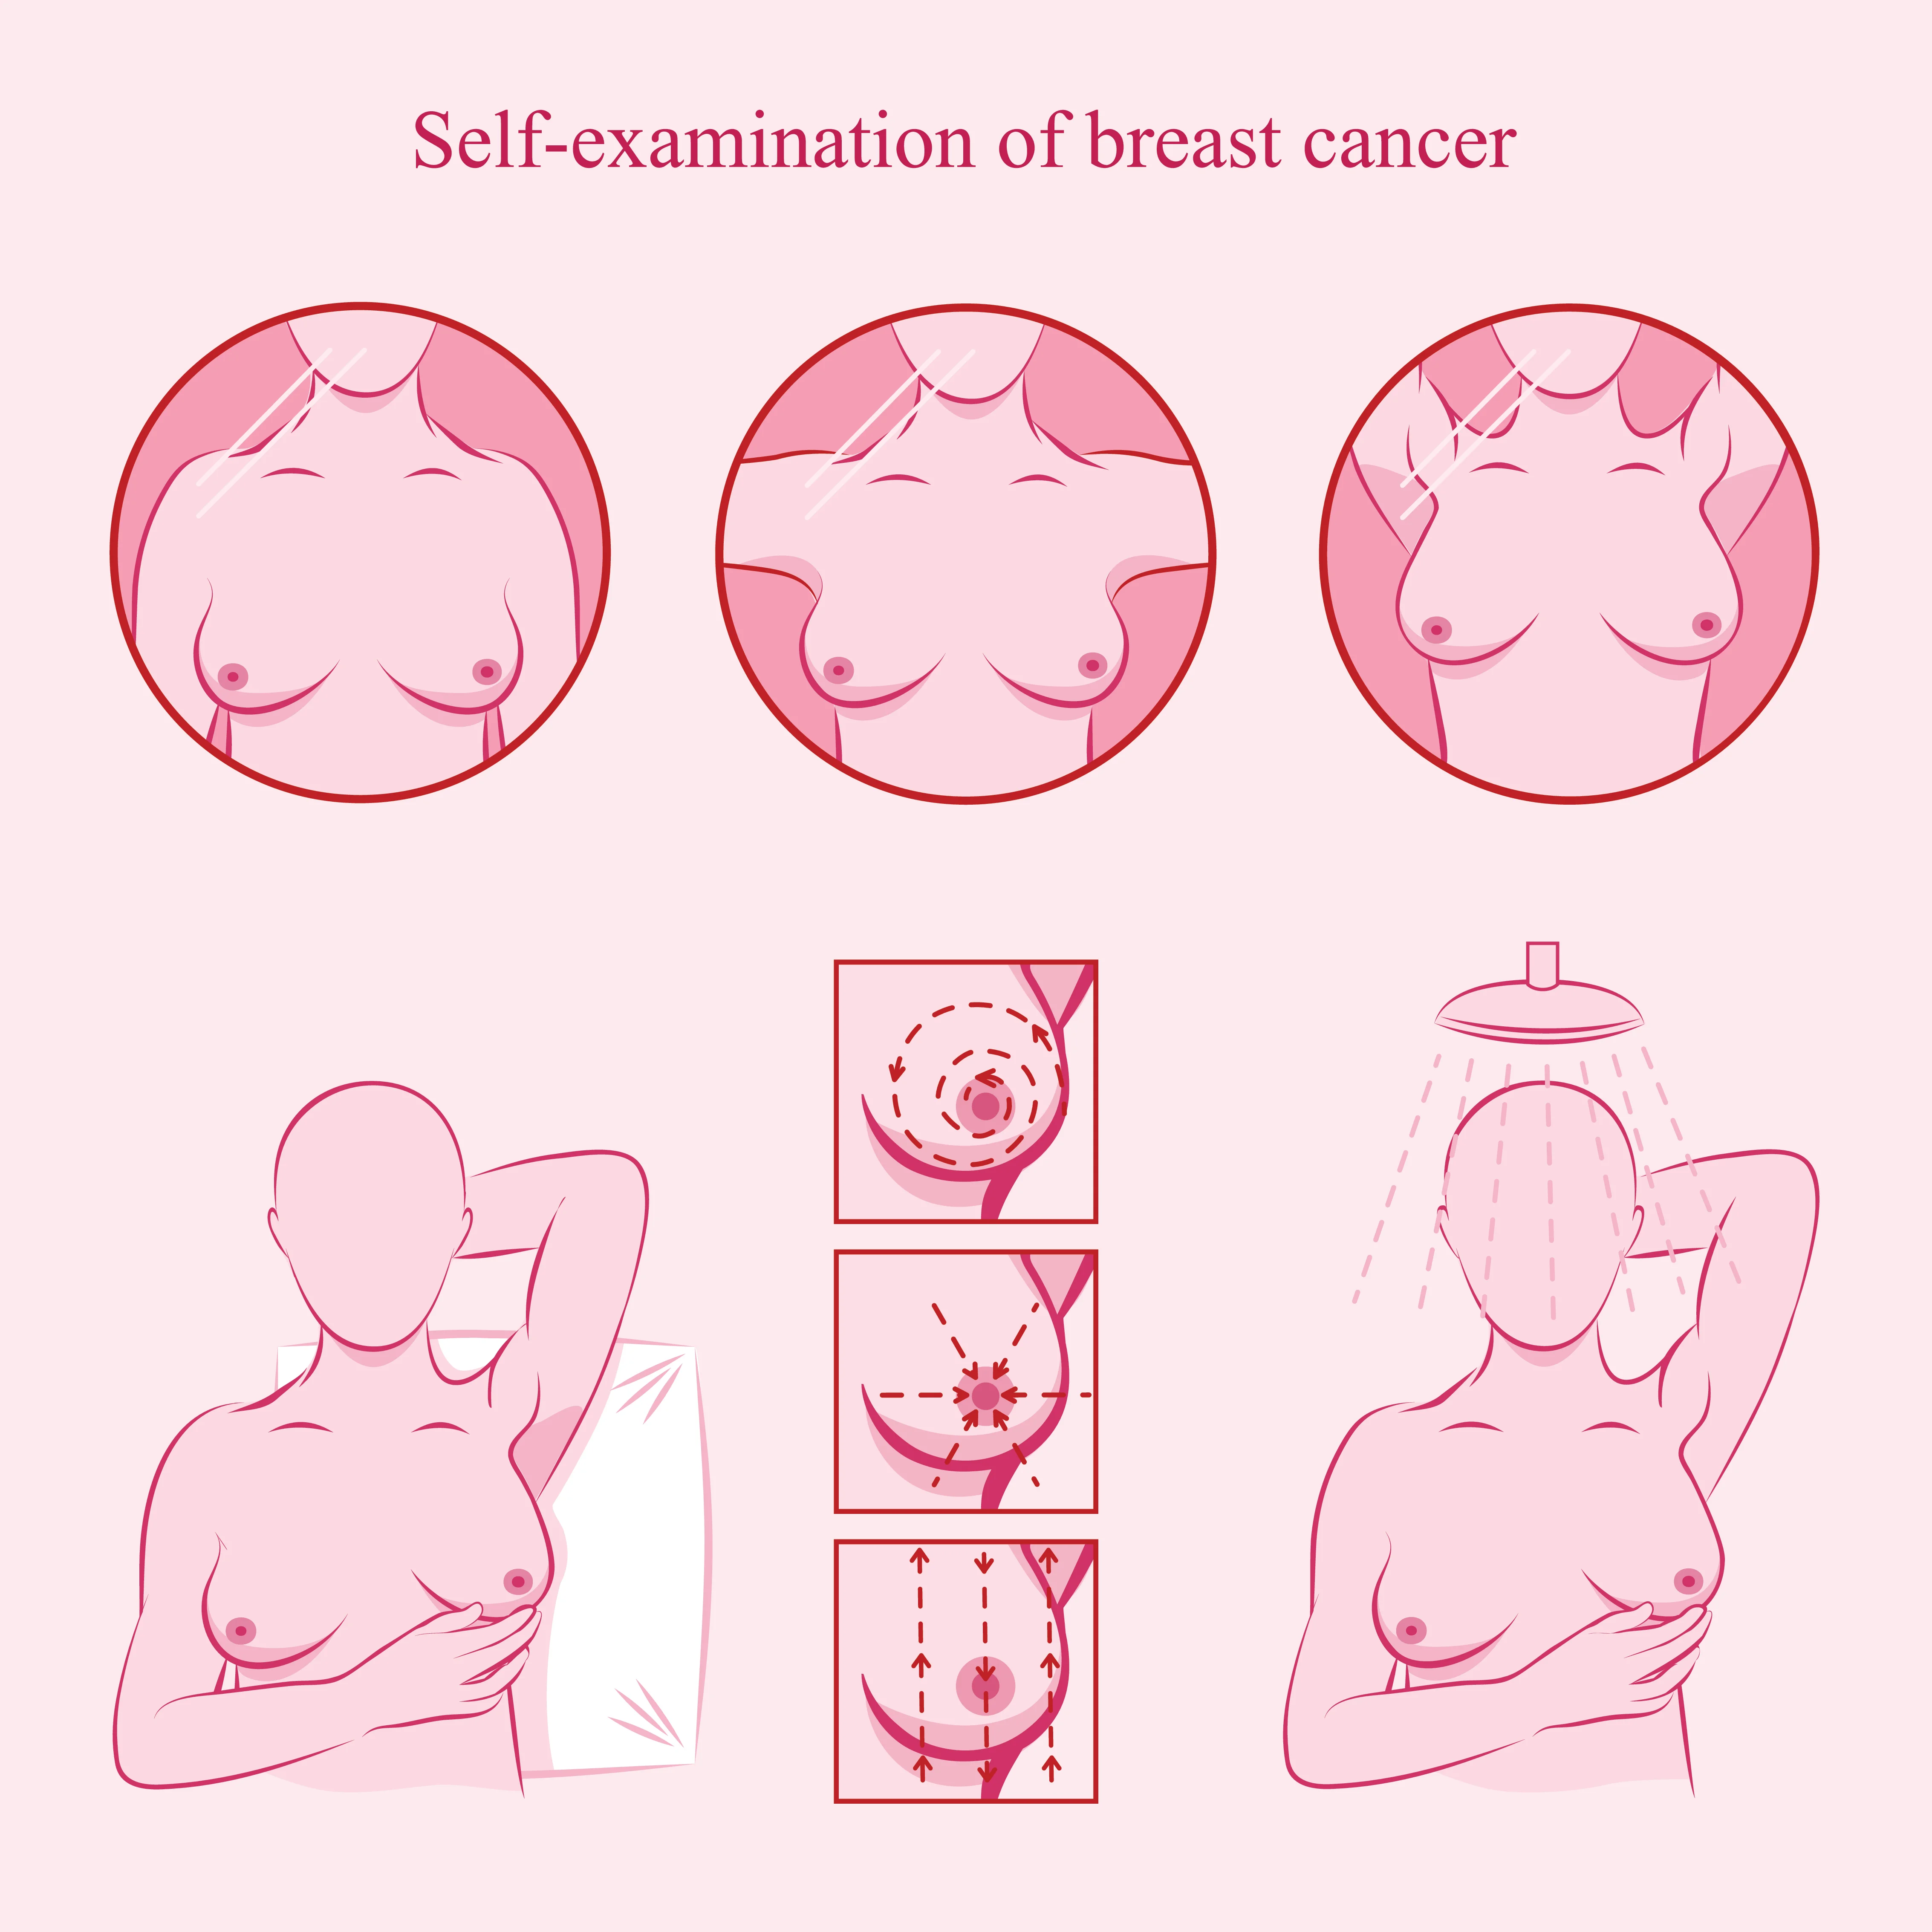 Breast Cancer Screening: Why Bother?